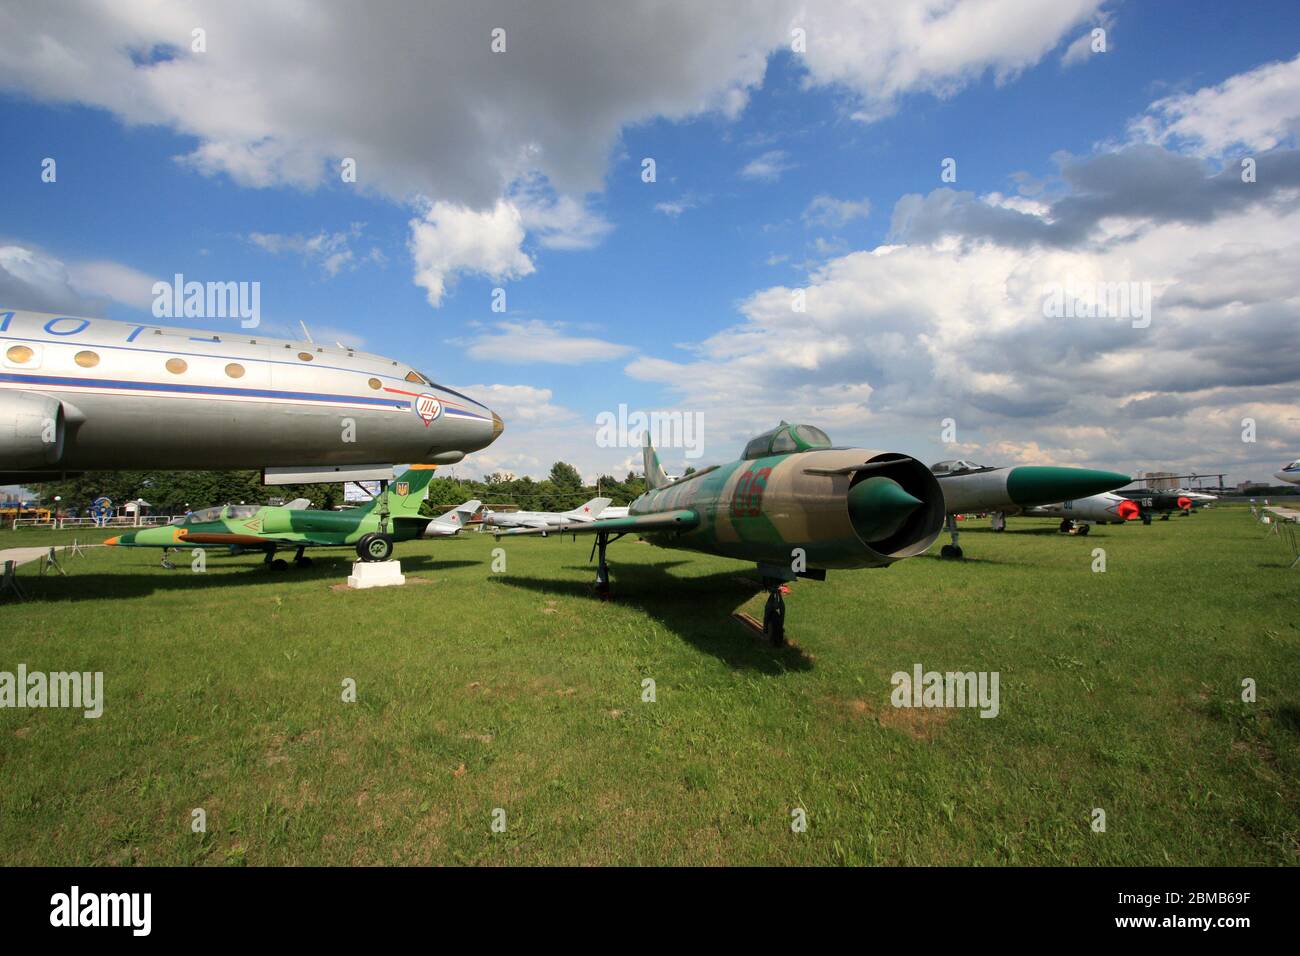 View of a Sukhoi Su-7 'Fitter-A' supersonic fighter next to a Aeroflot Tupolev Tu-104 jetliner at the Zhulyany State Aviation Museum of Ukraine Stock Photo